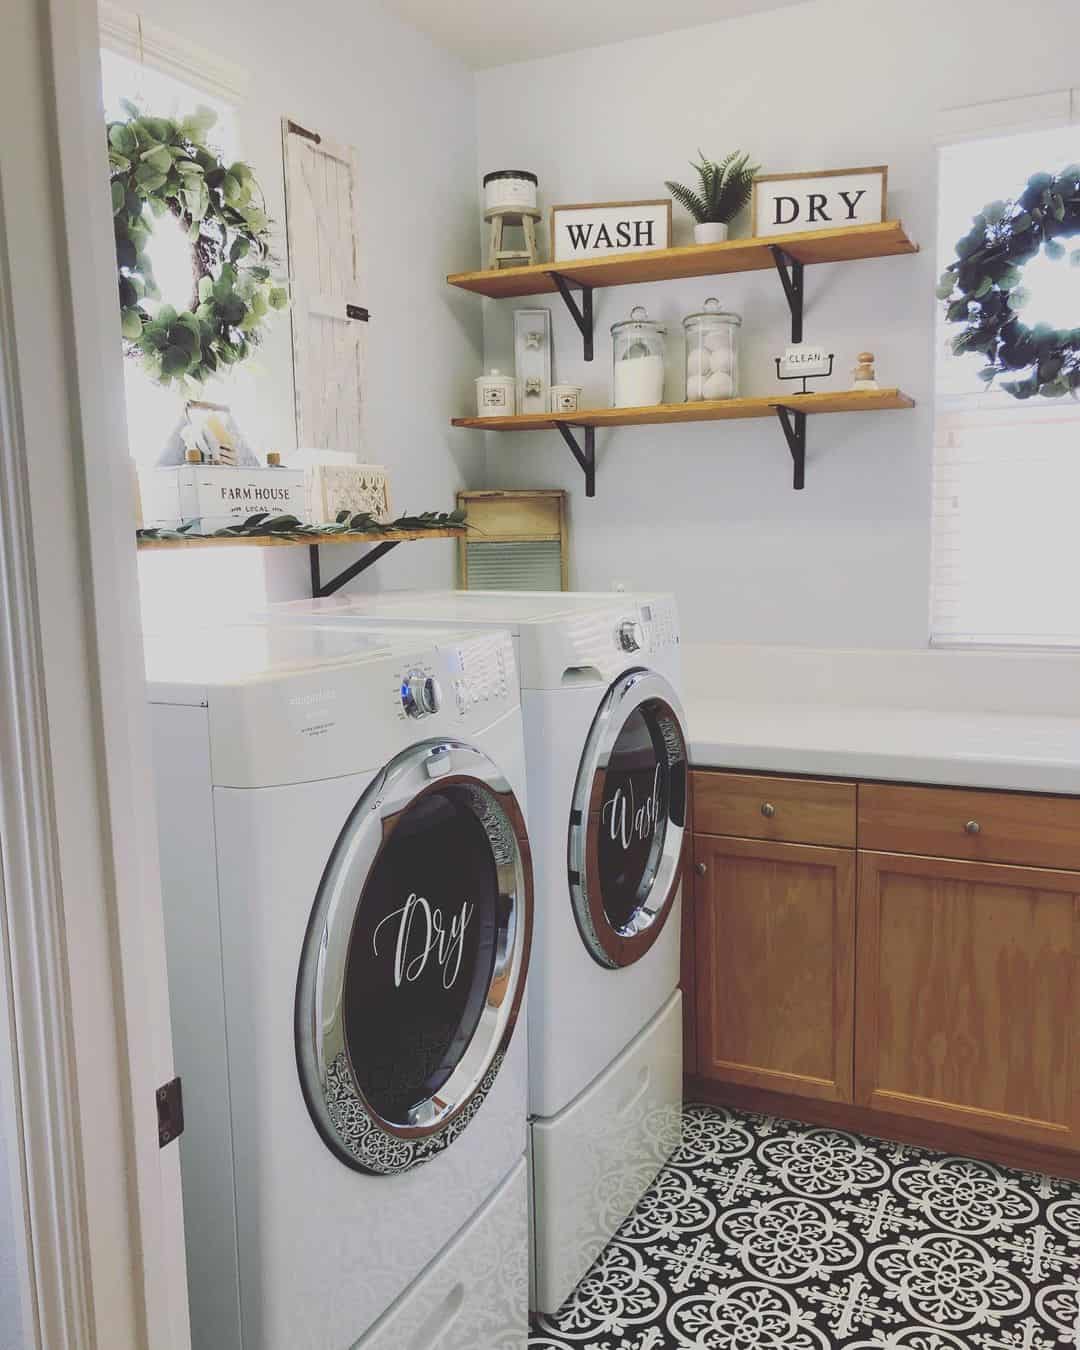 Laundry Room With Wood and Black Metal Shelves - Soul & Lane